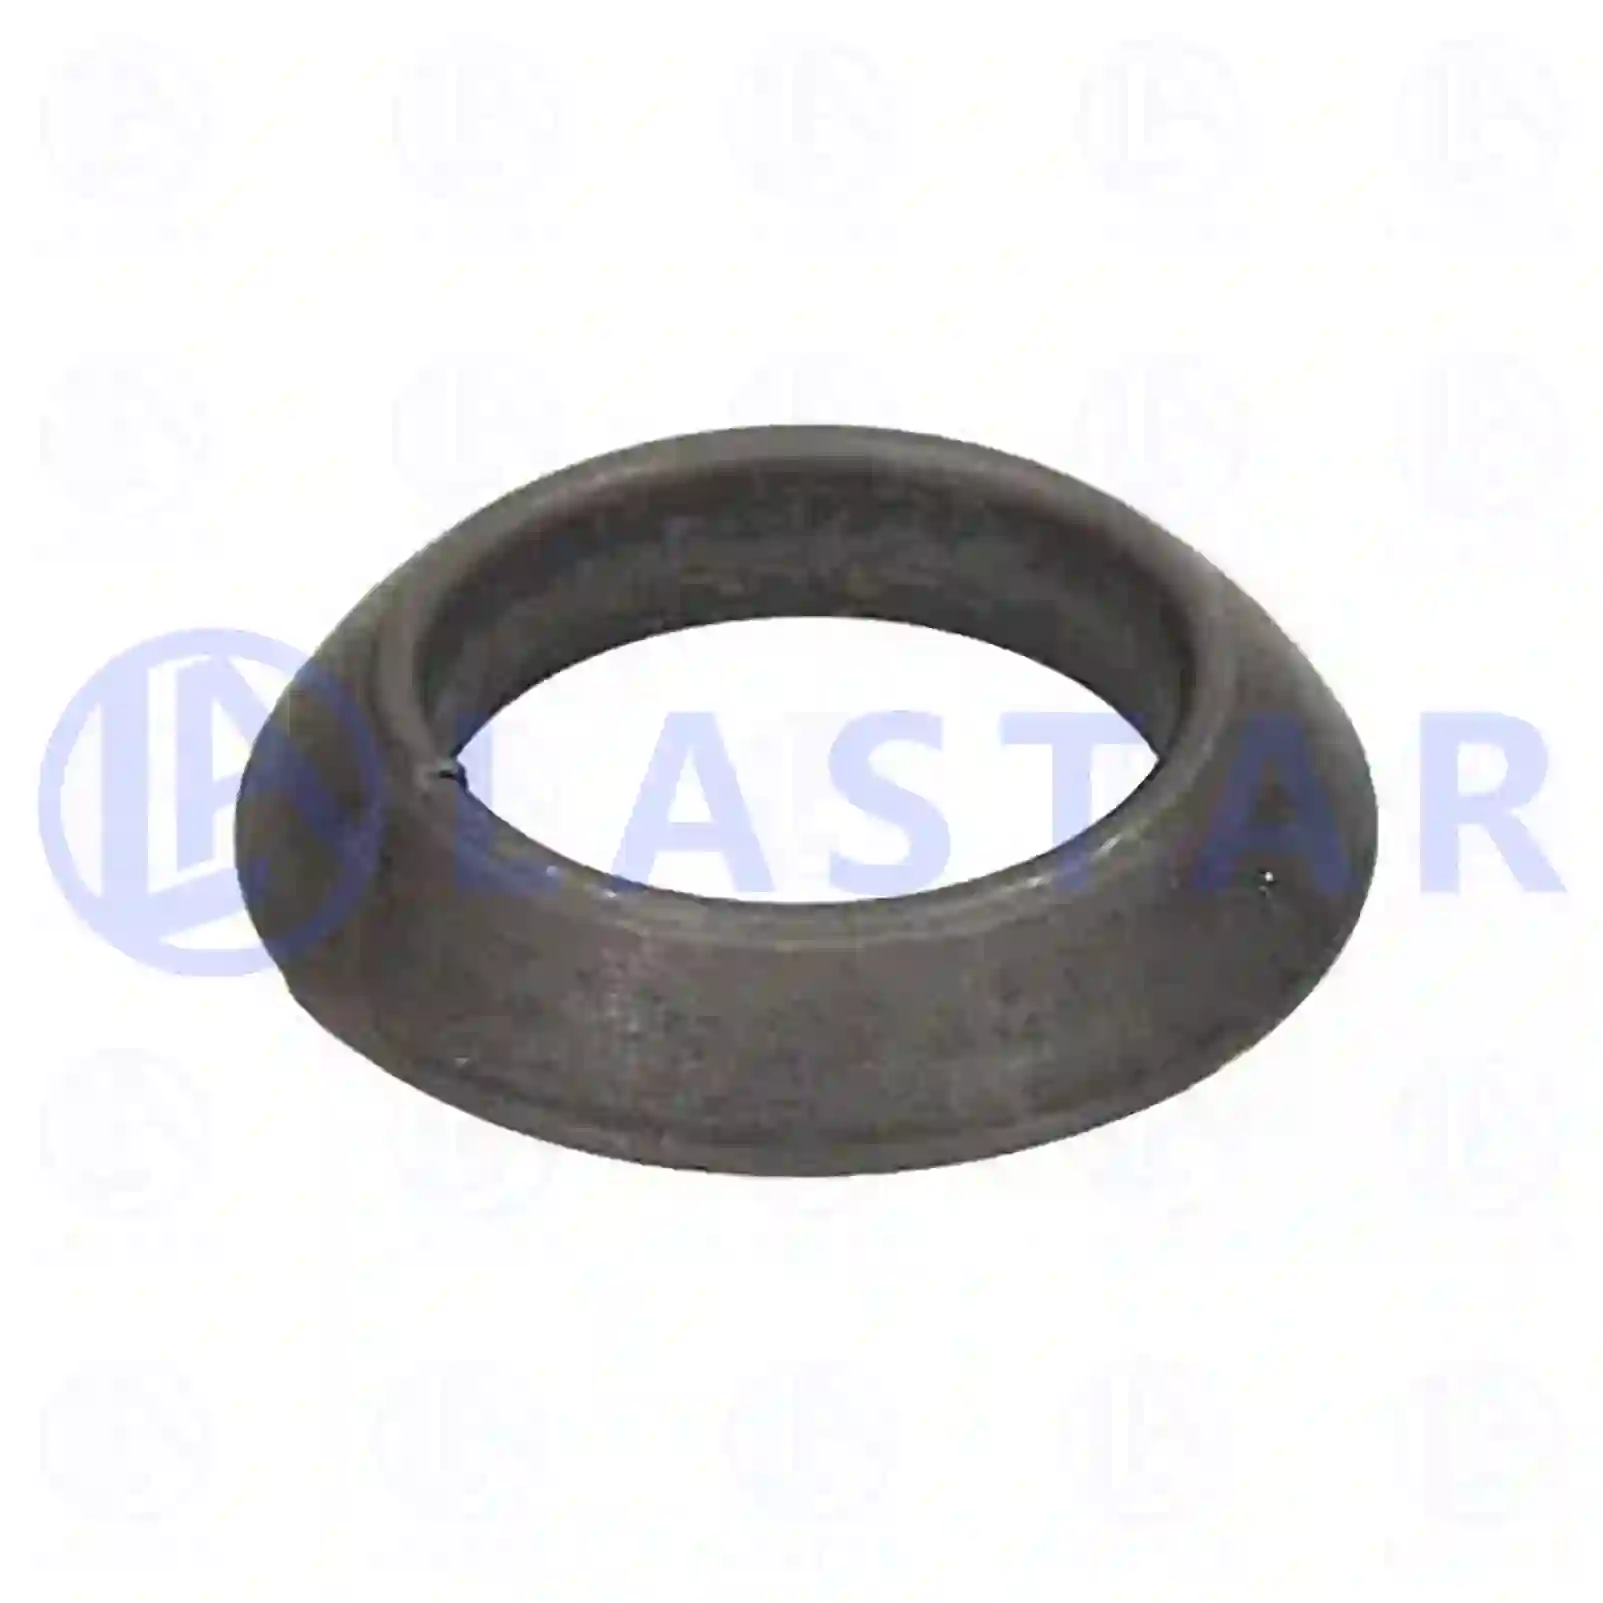 Centering ring, 77726281, 0331010020, 0664020075, ||  77726281 Lastar Spare Part | Truck Spare Parts, Auotomotive Spare Parts Centering ring, 77726281, 0331010020, 0664020075, ||  77726281 Lastar Spare Part | Truck Spare Parts, Auotomotive Spare Parts